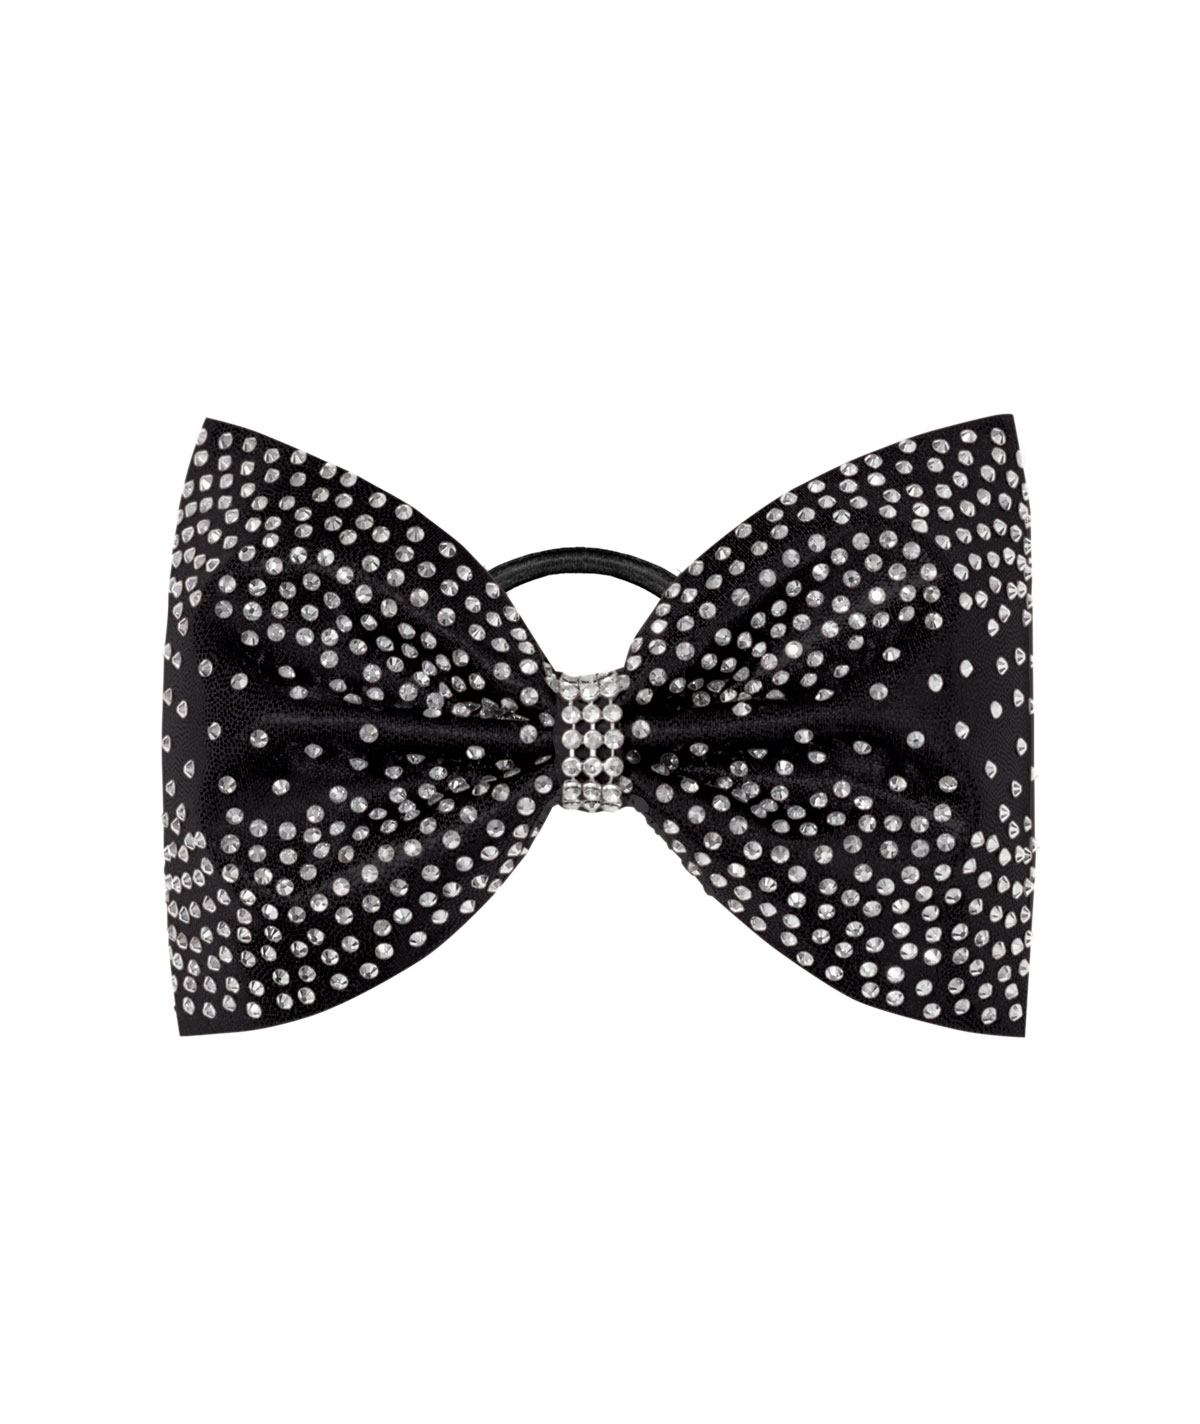 Tailless circus cheer bow